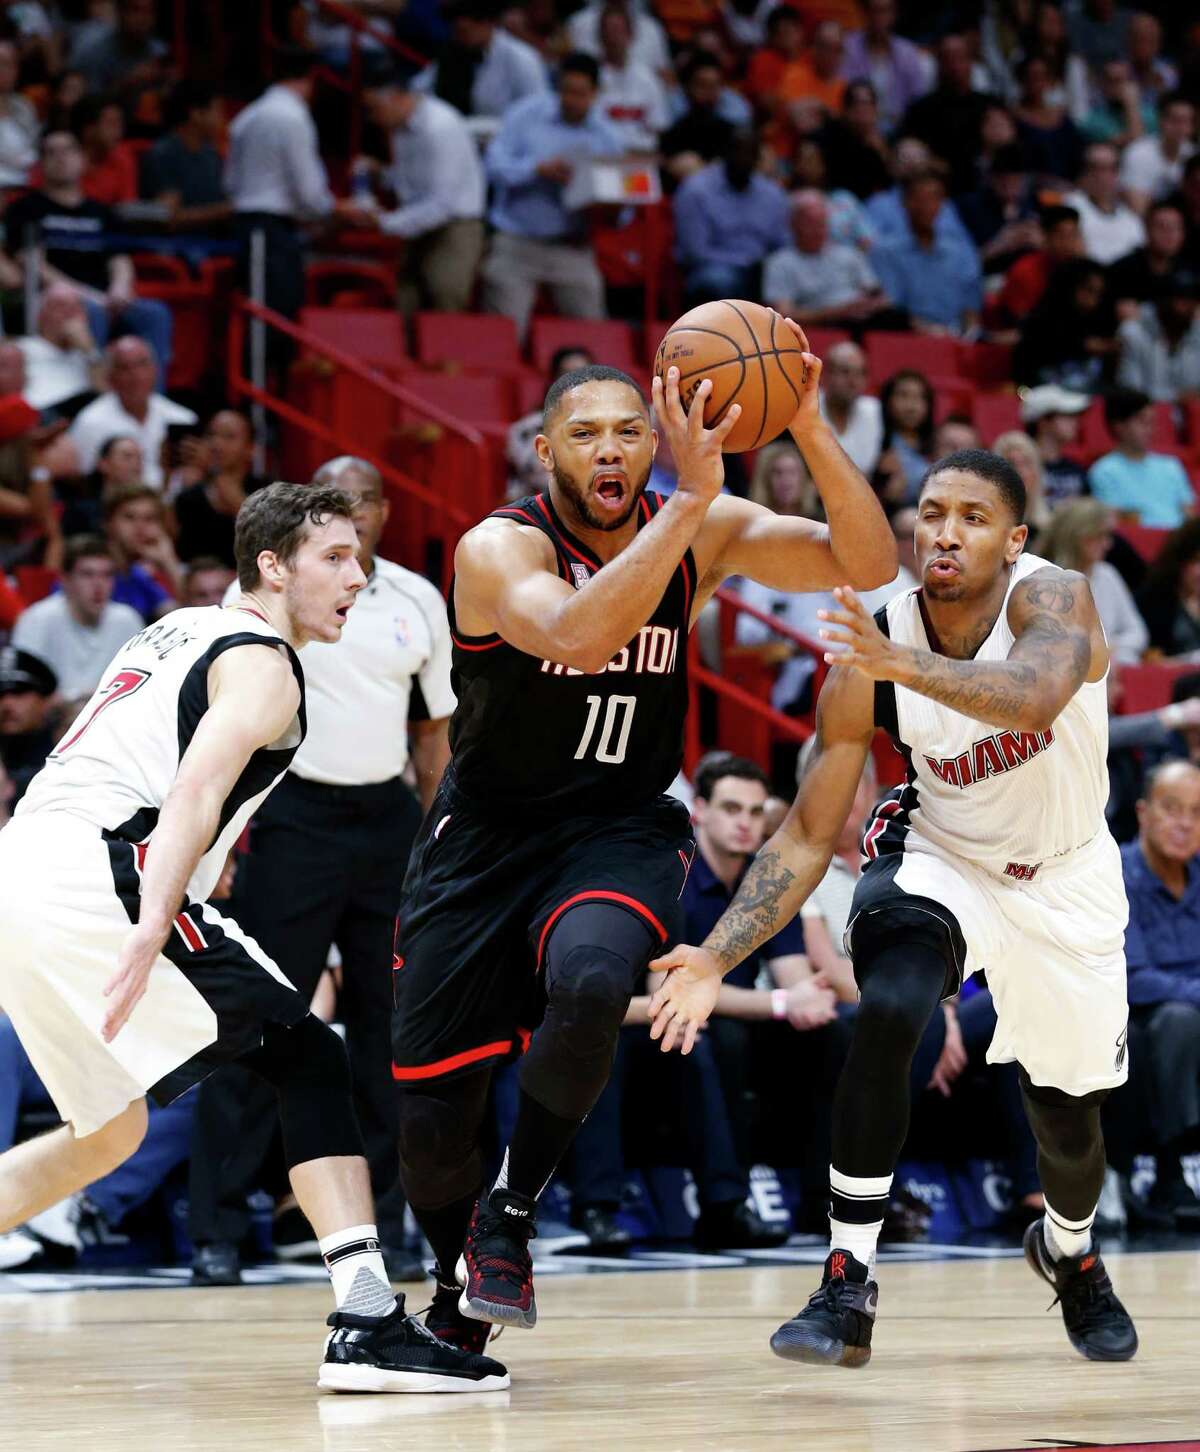 Houston Rockets guard Eric Gordon (10) drives past Miami Heat guard Goran Dragic, left, and guard Rodney McGruder during the first half of an NBA basketball game, Tuesday, Jan. 17, 2017, in Miami. (AP Photo/Wilfredo Lee)